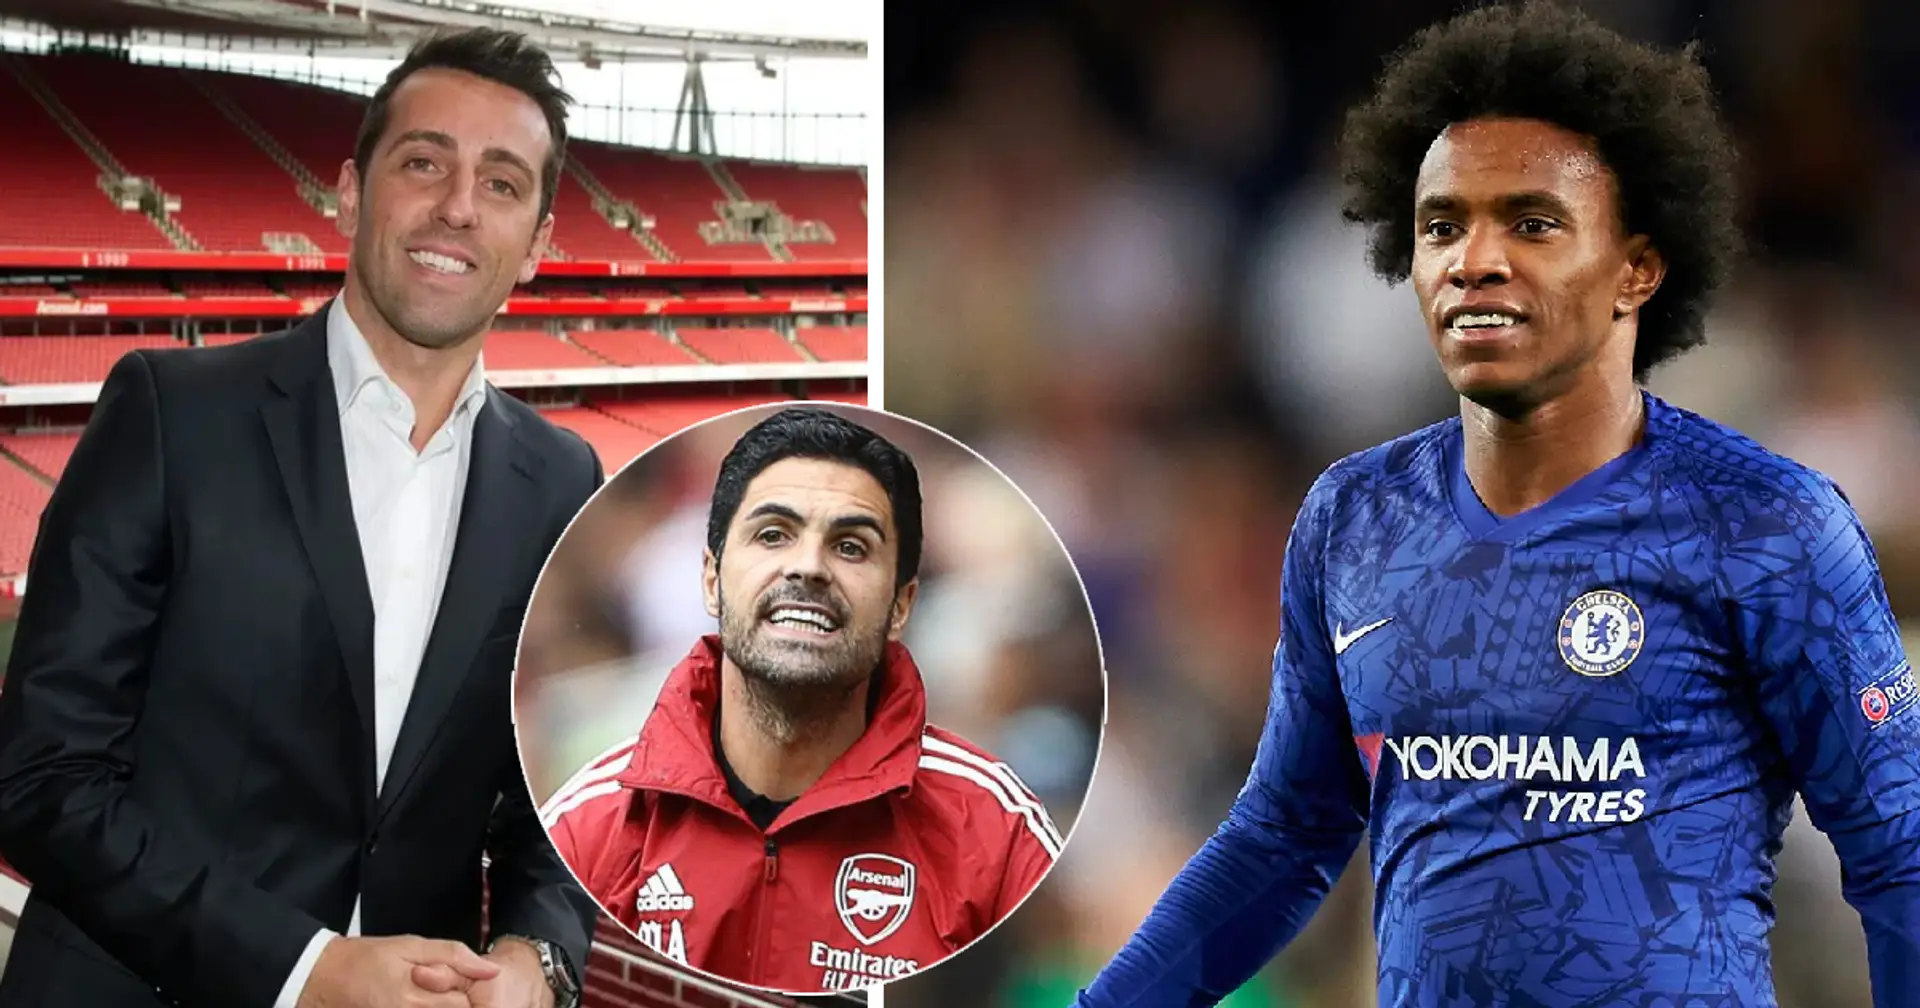 'It's hard to say if it's a mistake': Arsenal director Edu on signing Willian from Chelsea